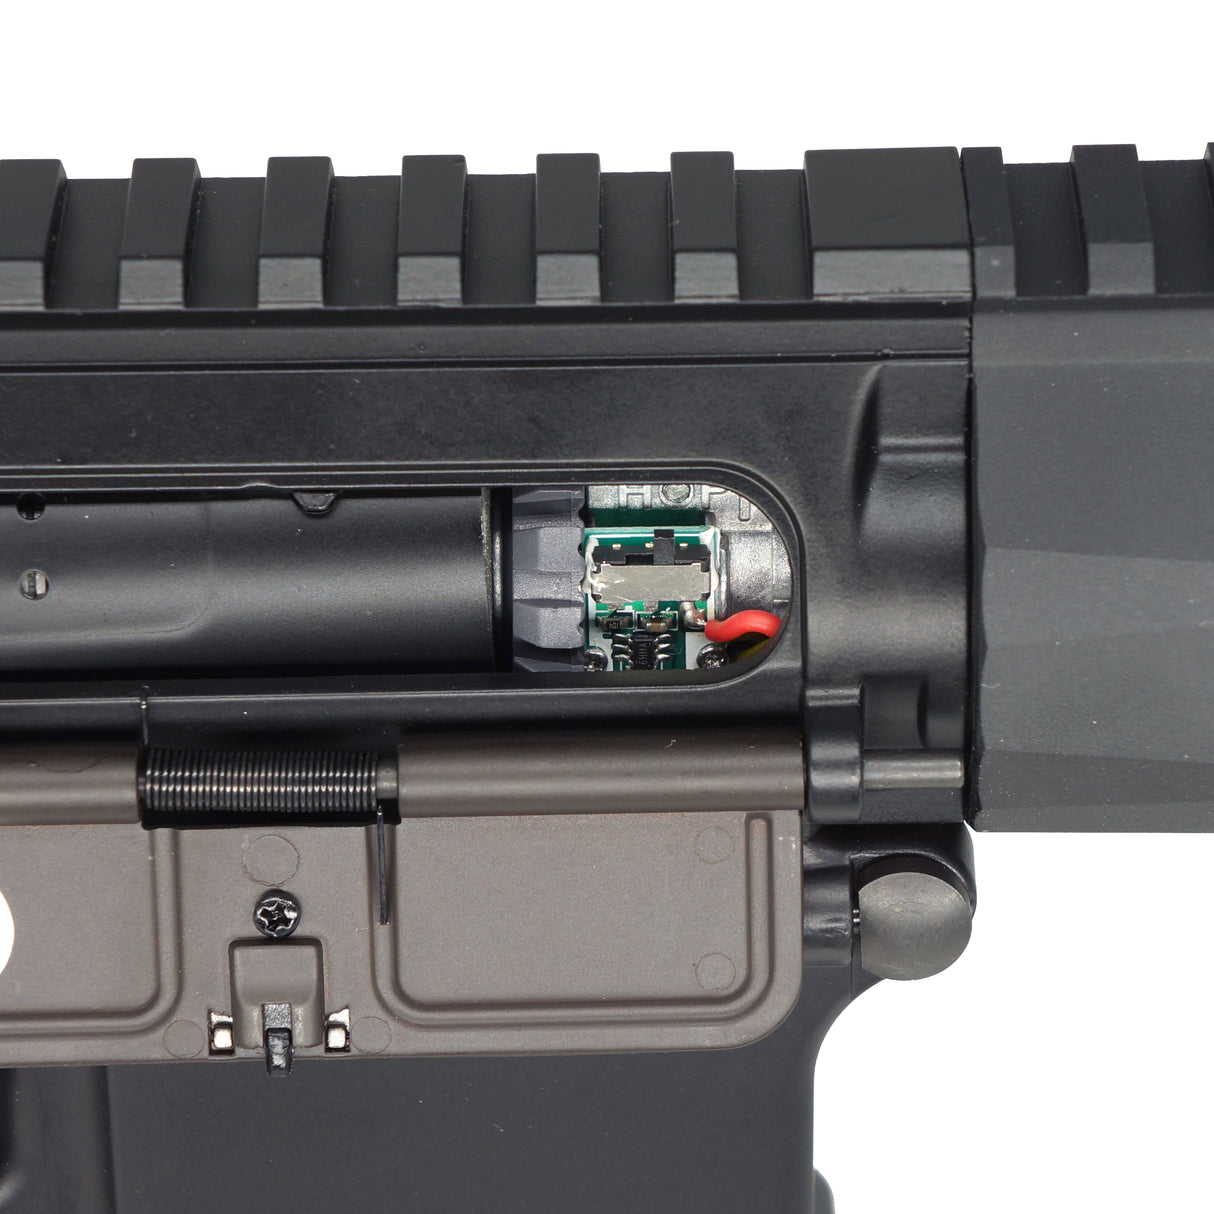 CYMA Platinum M4 URX-4 M-LOK AEG Build In Mosfet and Tracer Hop-Up ( CM068M )